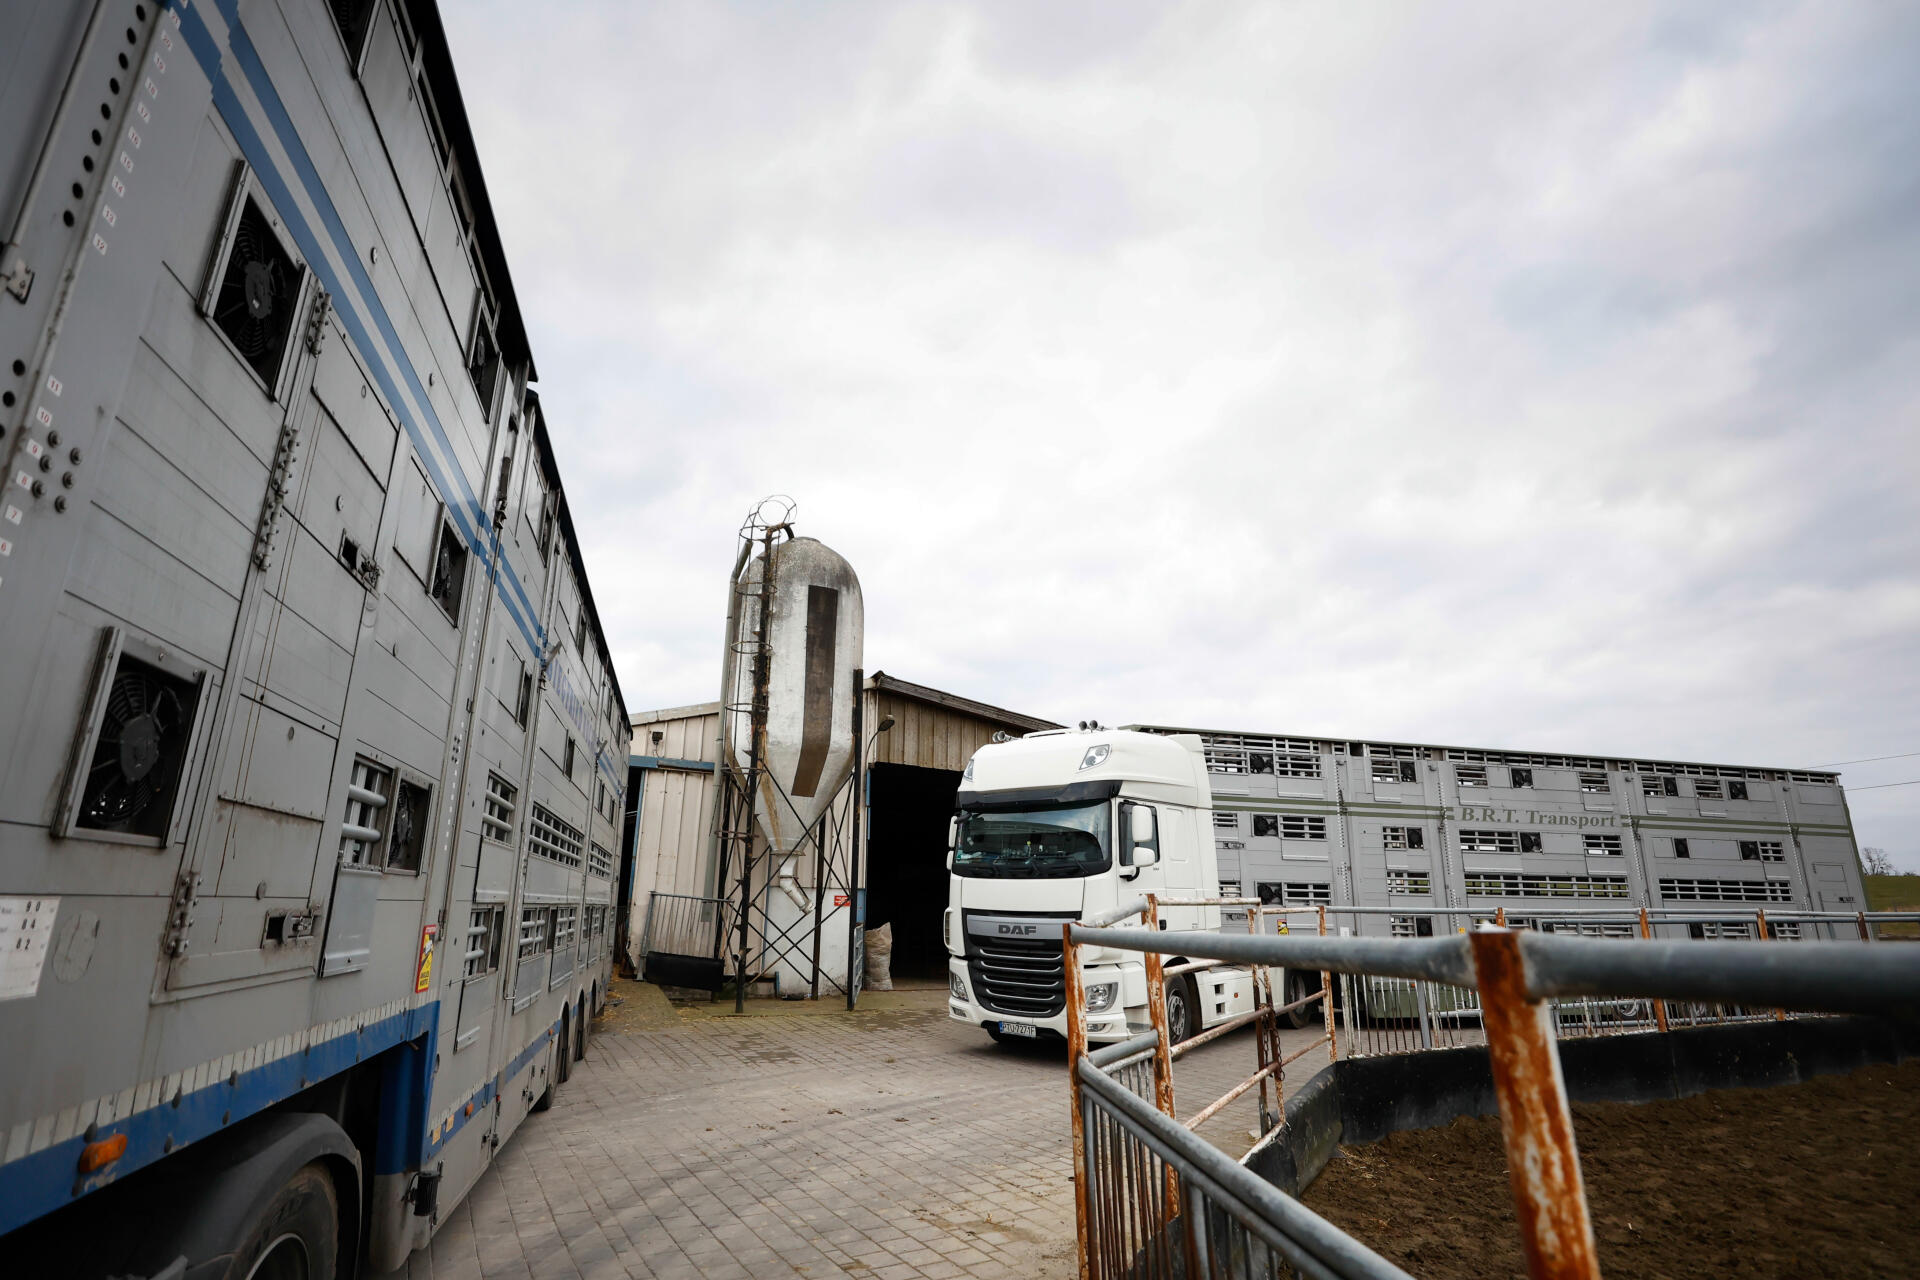 This stopover farm welcomes animals in transit.  Most calf transport trucks come from the Czech Republic or Poland and cross Europe to Spain.  On February 10, 2022, in Kappelen (Haut-Rhin).